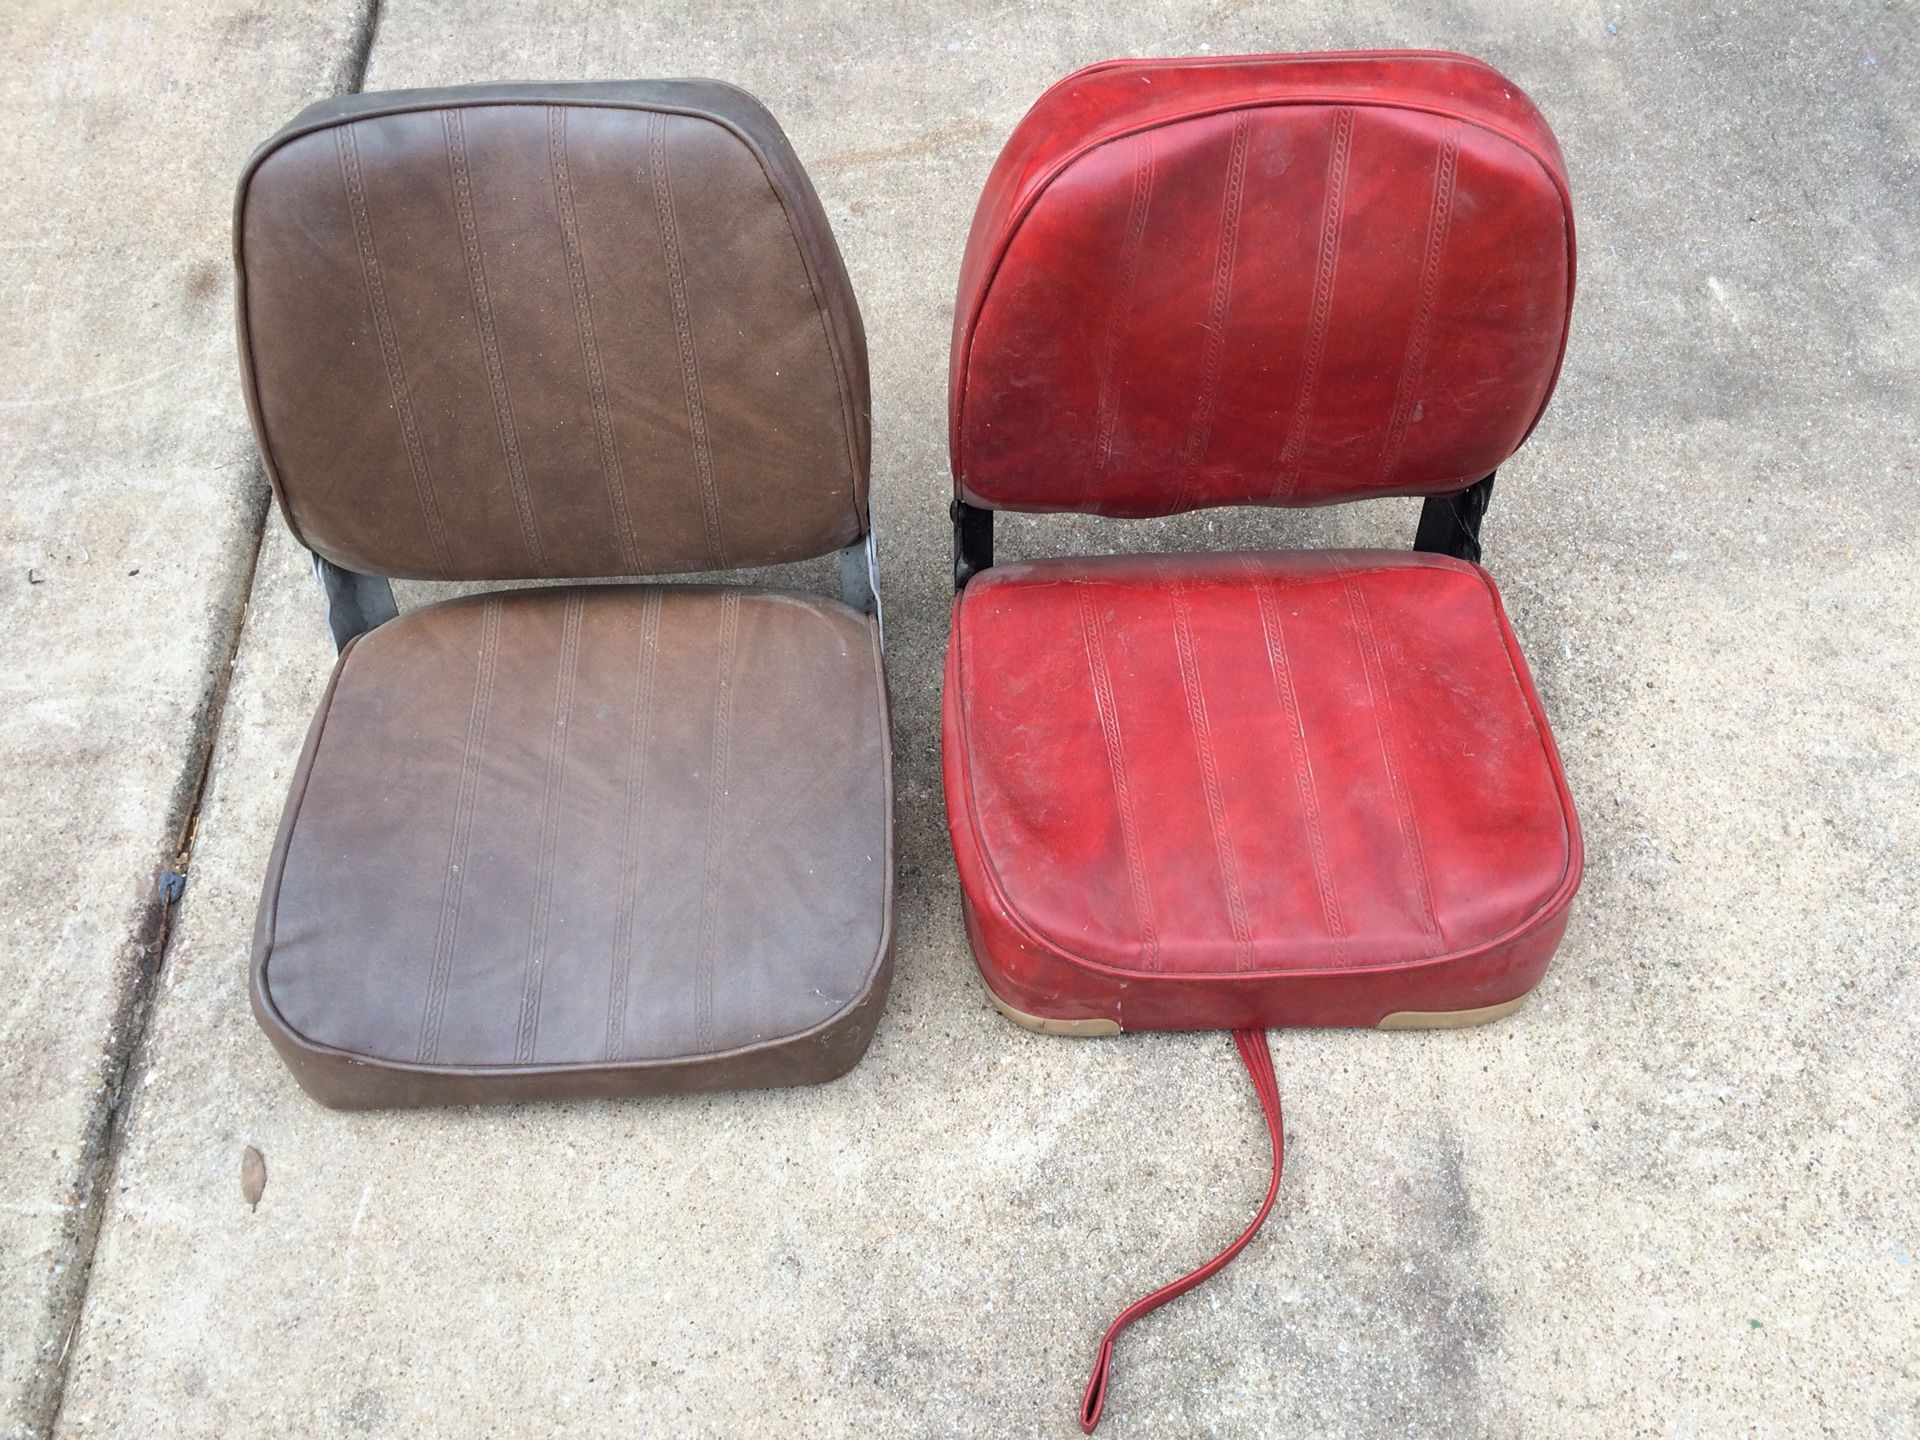 Boat seats several to choose from 10 each new and used